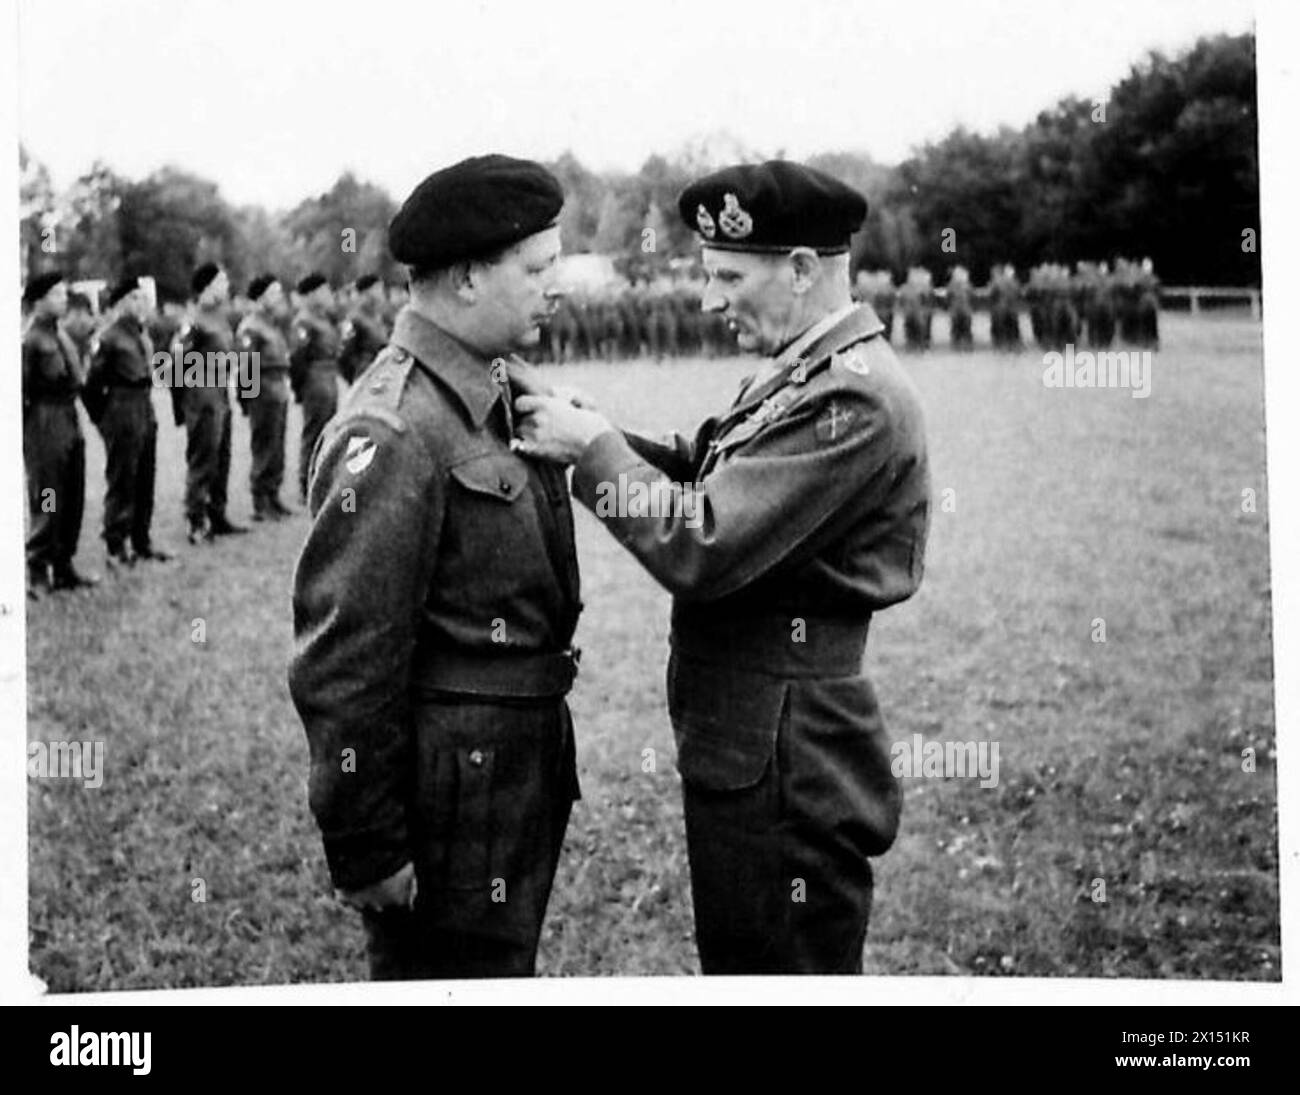 INVESTITURE CEREMONY FOR MEN OF THE 6TH GUARDS ARMOURED BRIGADE - Lieutenant Colonel C.I.H.Dunbar 3rd Tk.Scots Guards receives the D.S.O. from the C-in-C British Army, 21st Army Group Stock Photo